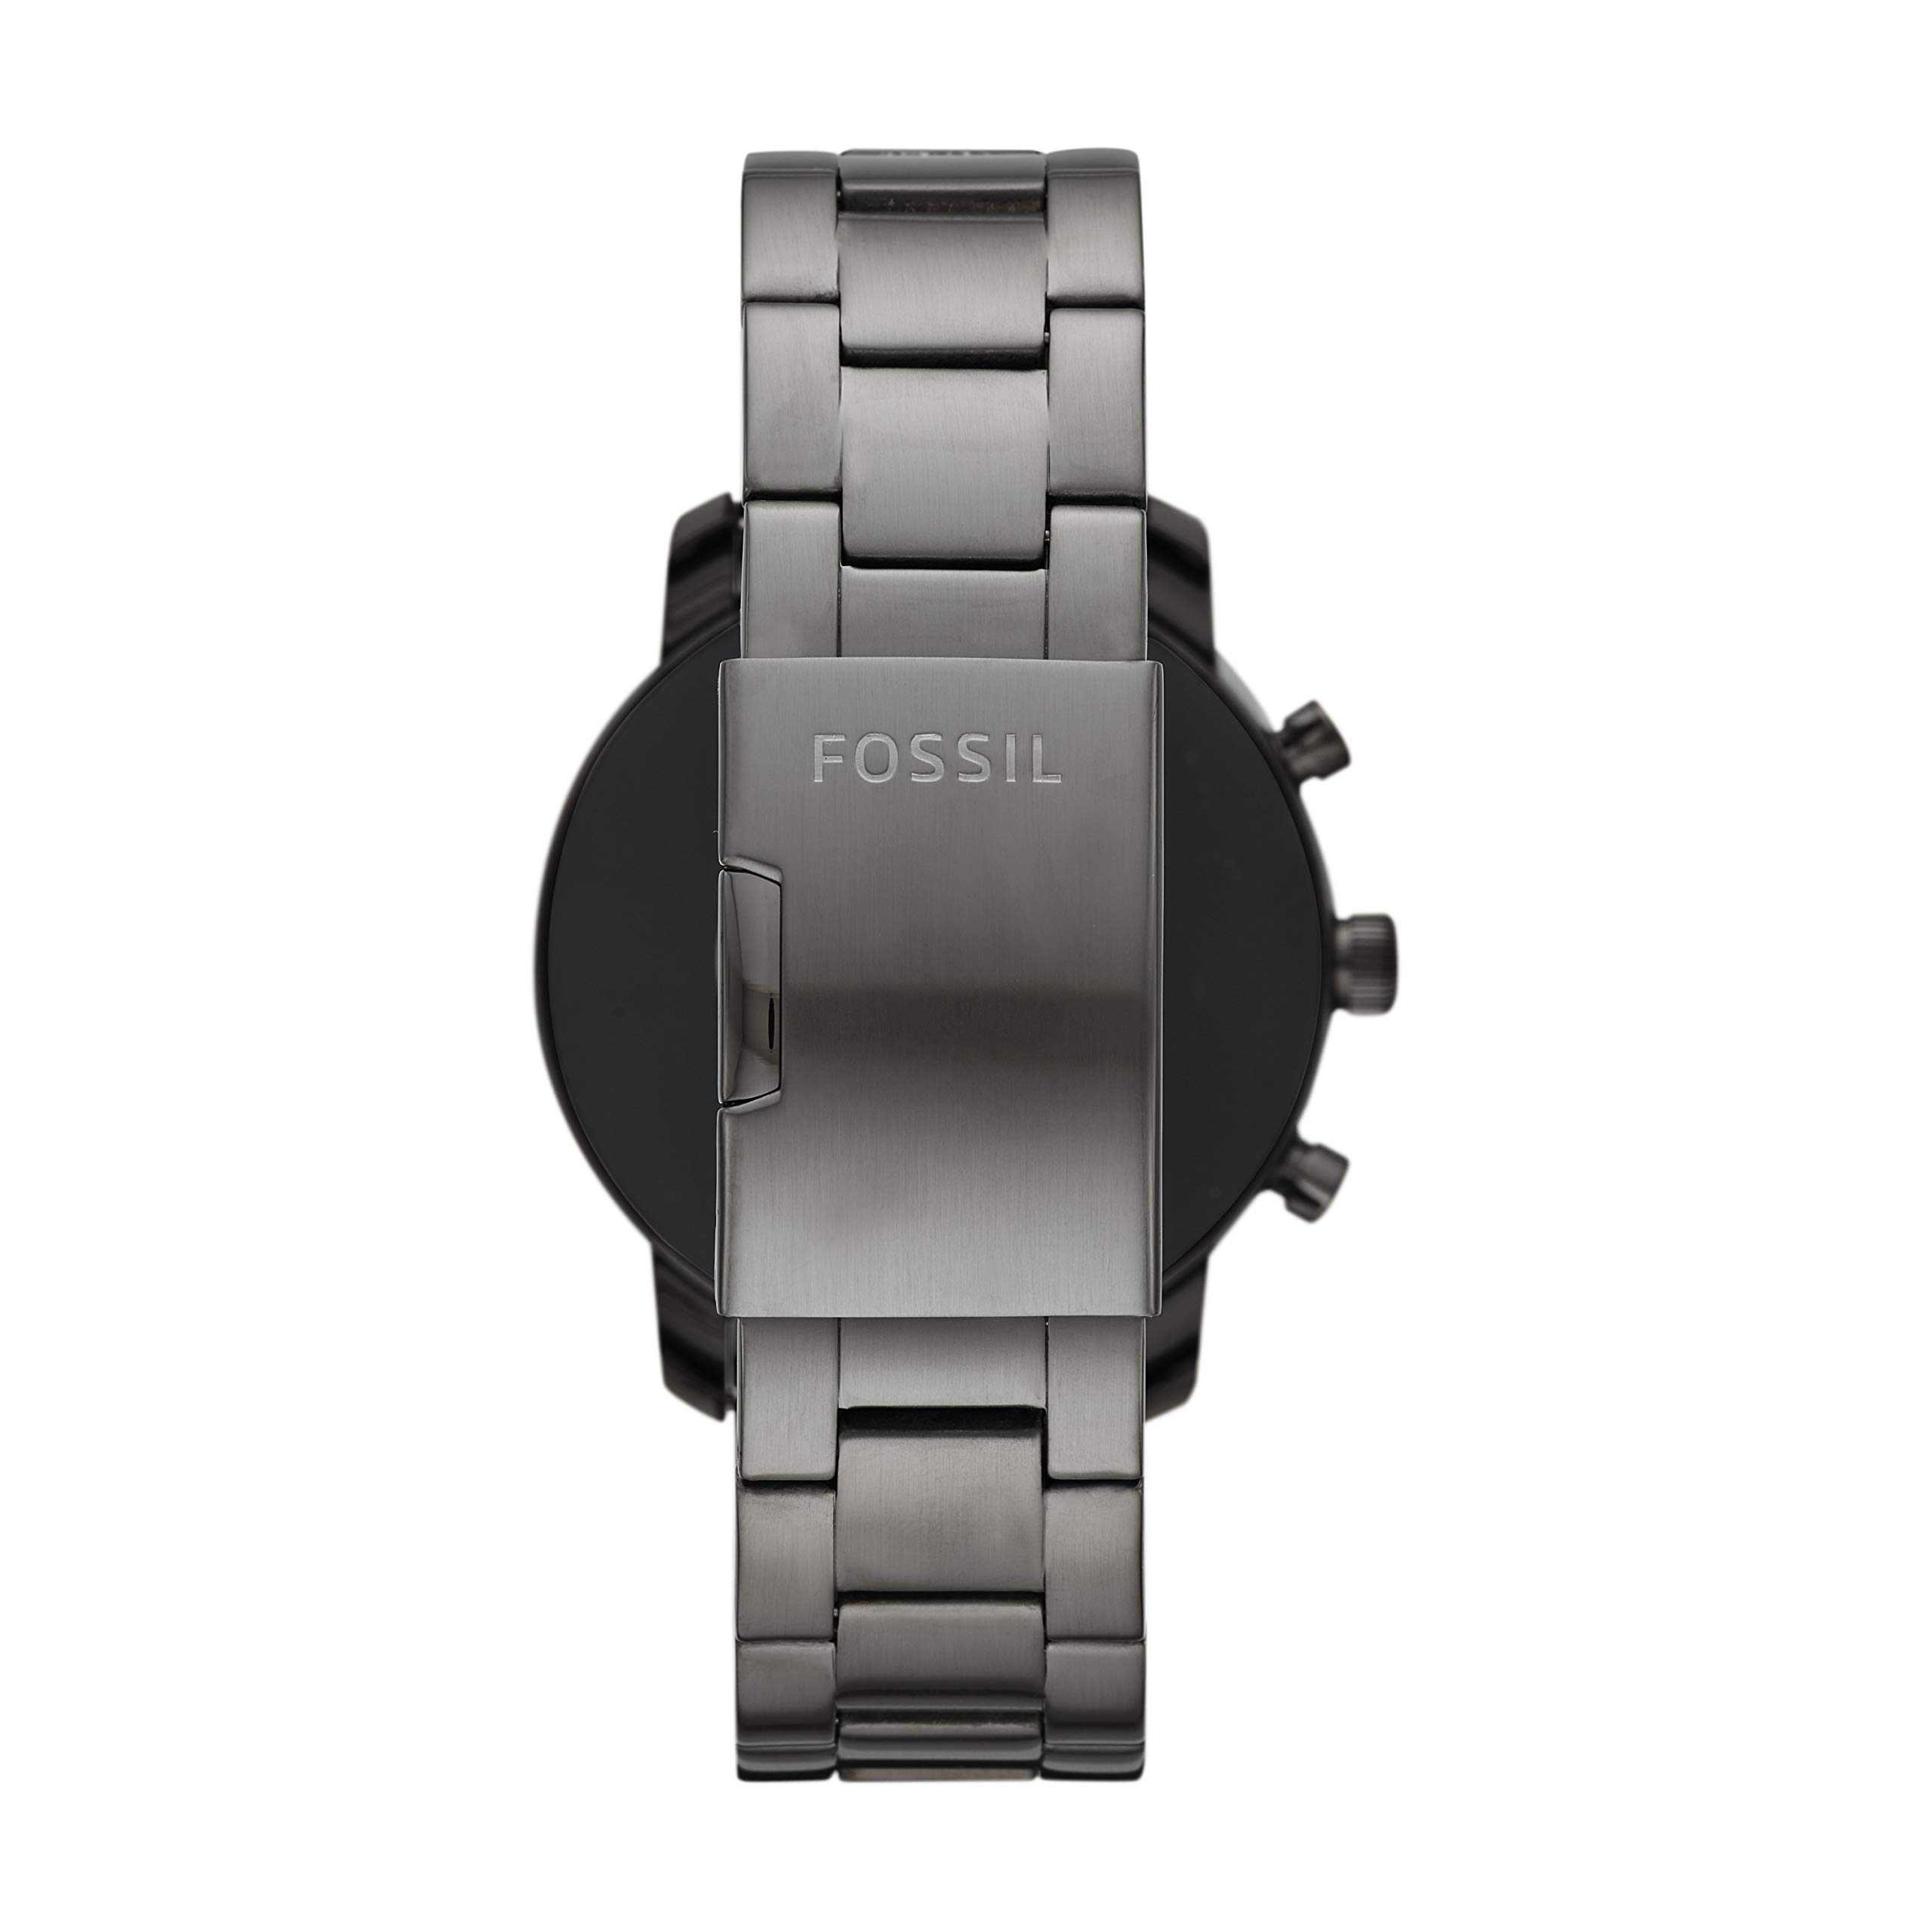 Fossil Men's Gen 4 Explorist HR Stainless Steel Touchscreen Smartwatch with Heart Rate, GPS, NFC, and Smartphone Notifications